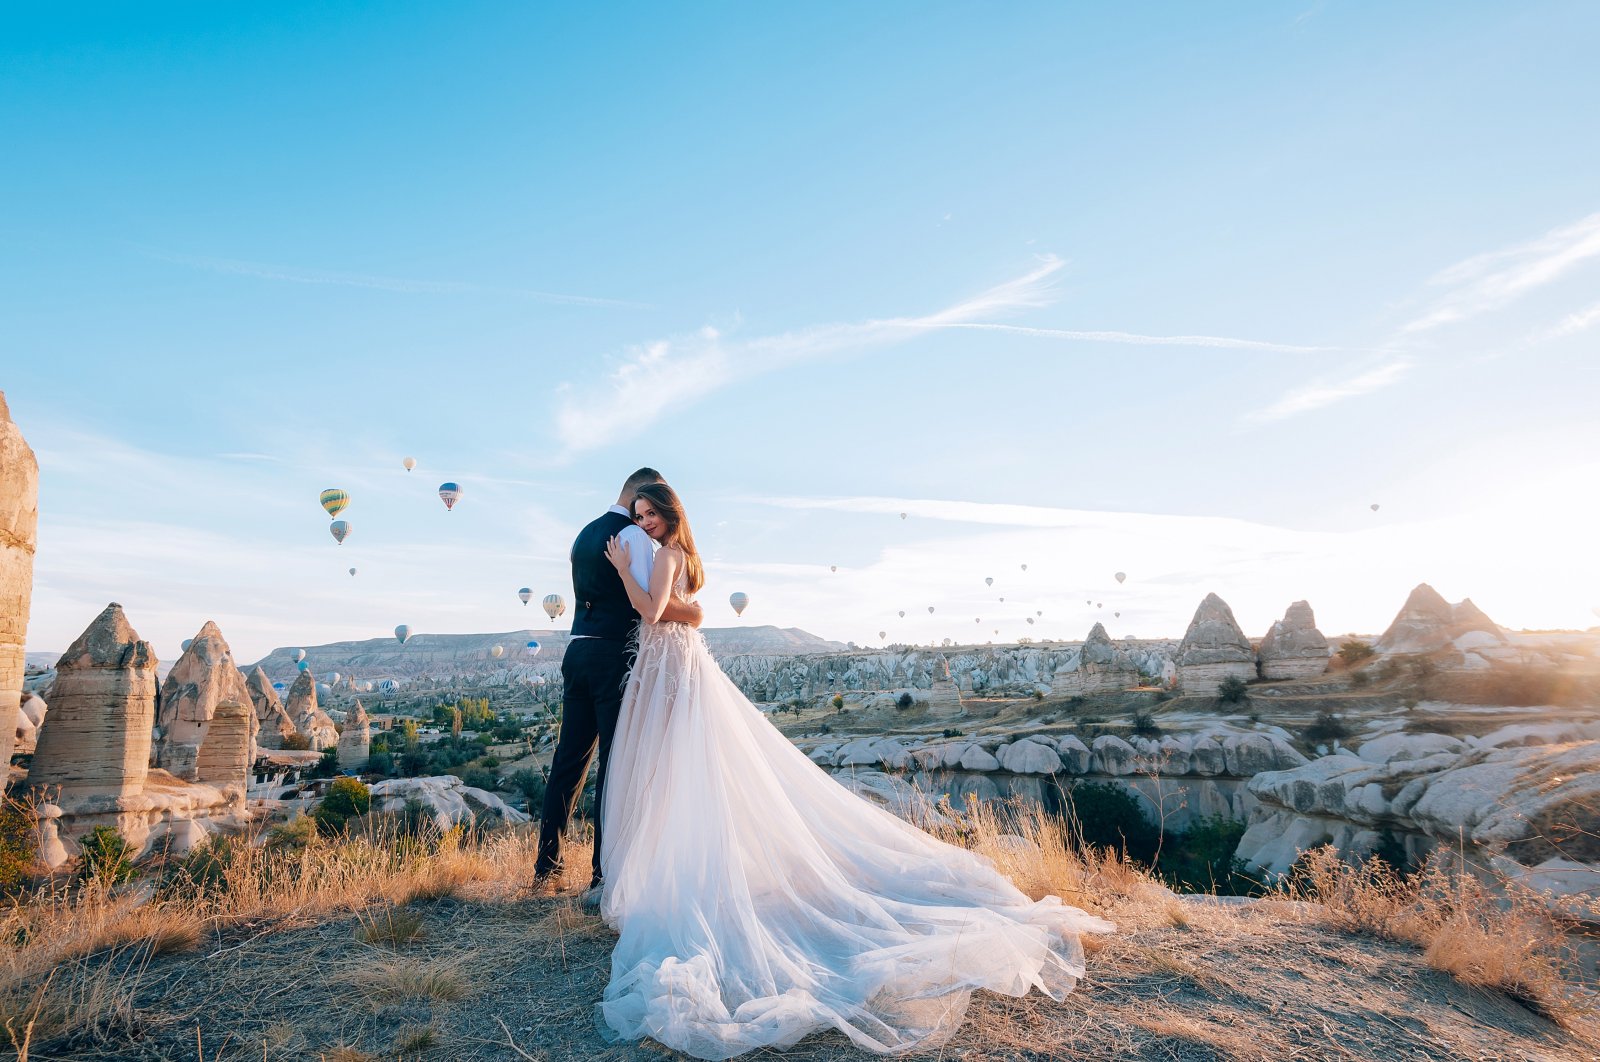 A young married couple posing for a photo in Cappadocia, Turkey. (Shutterstock Photo)